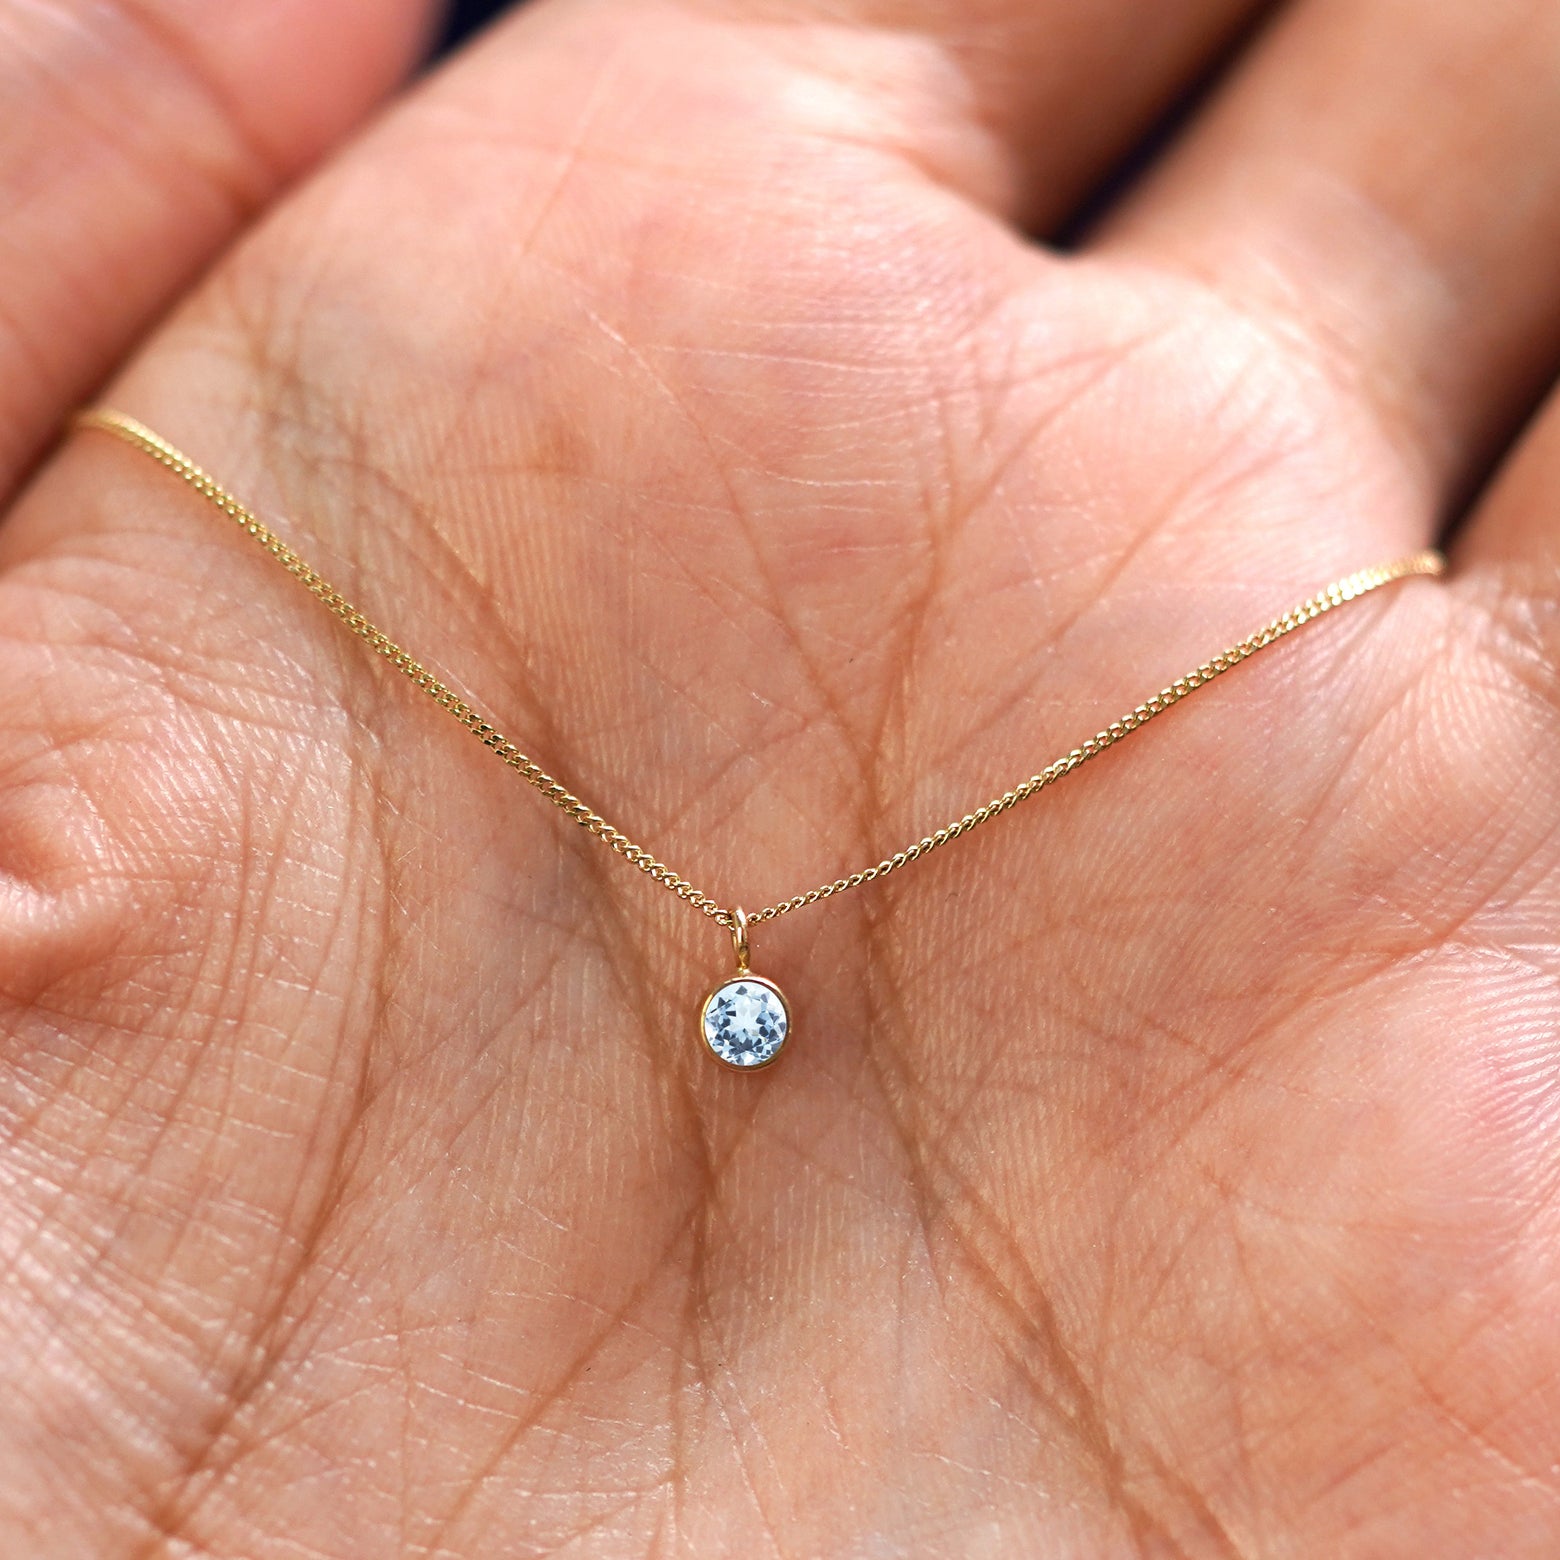 A solid 14k gold Aquamarine Necklace resting in a models palm